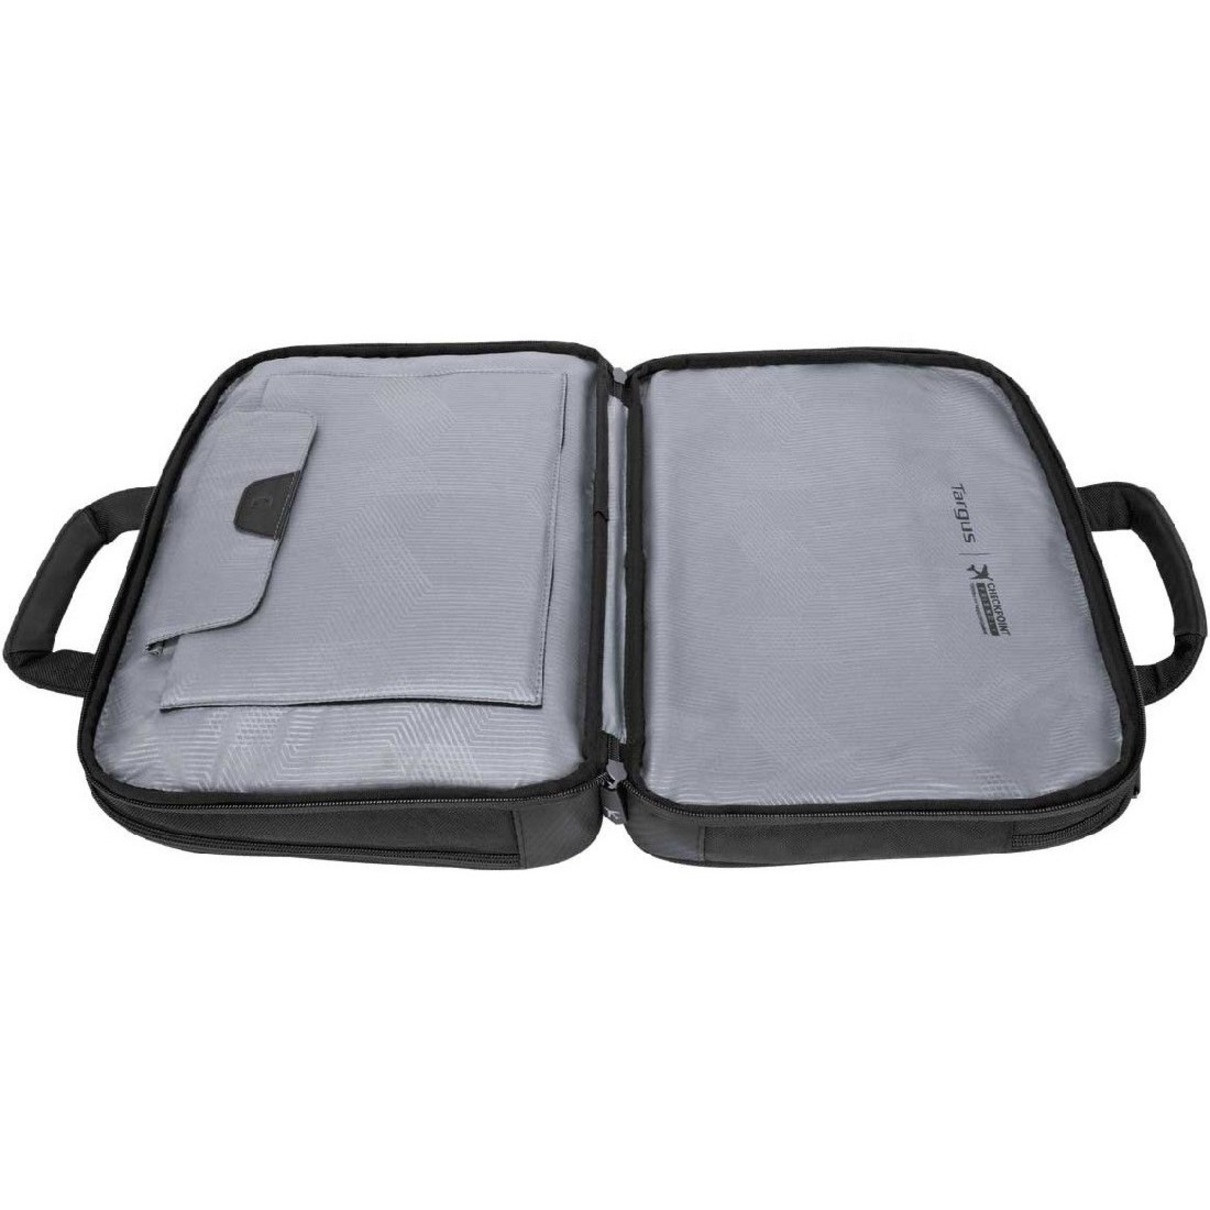 Targus Corporate Traveler CUCT02UA14S Carrying Case (Briefcase) for 14 ...